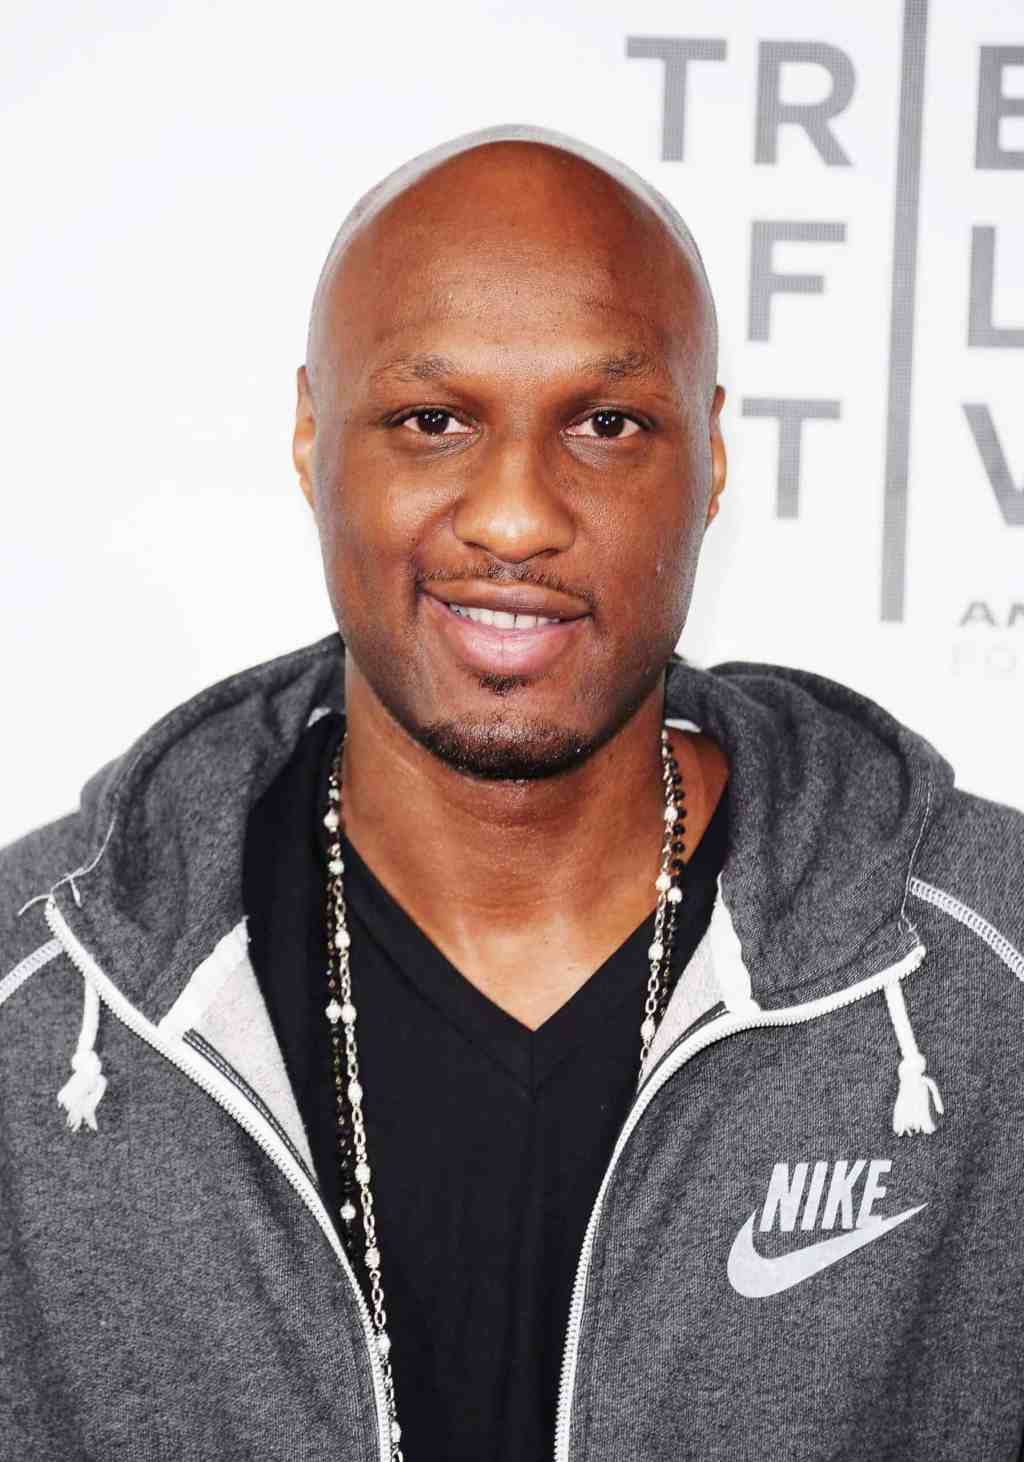 NO! Lamar Odom Collapsed in an L.A. Nightclub [VIDEO]